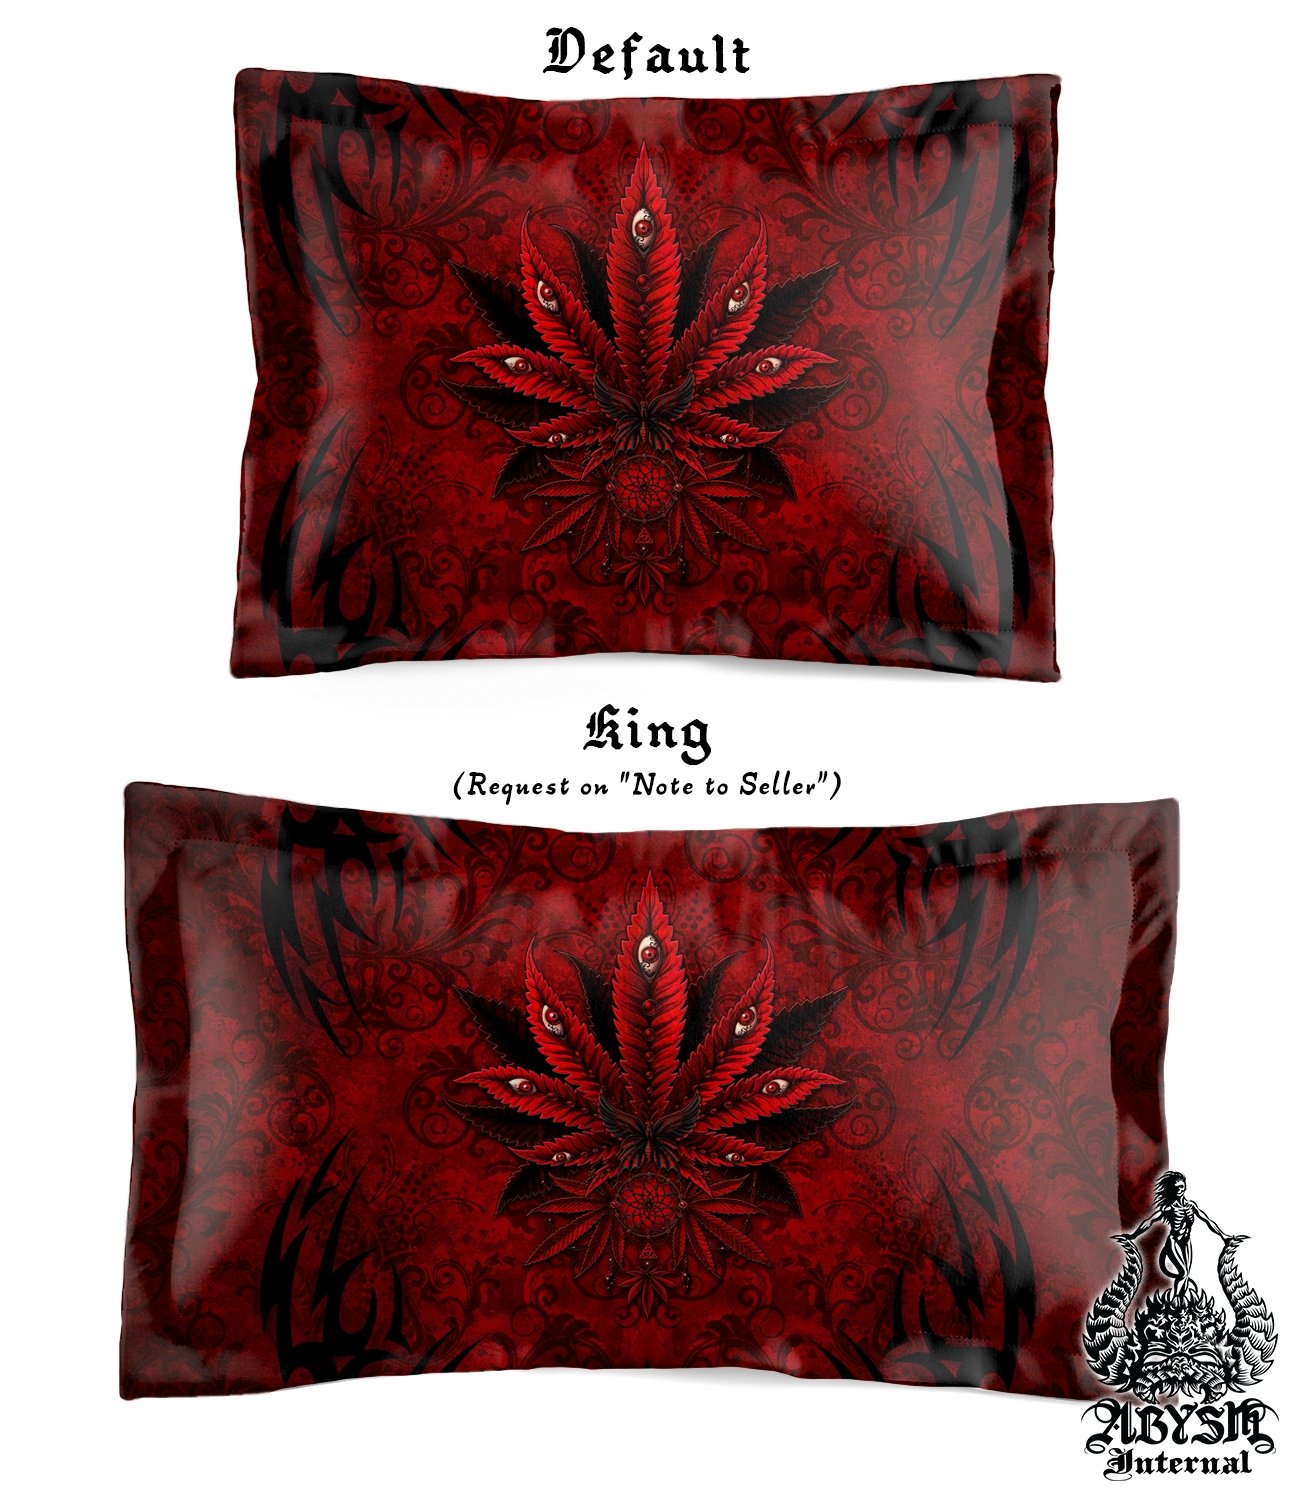 Gothic Weed Bedding Set, Comforter and Duvet, Cannabis Bed Cover, Marijuana Bedroom Decor, King, Queen and Twin Size, 420 Room Art - Bloody Goth - Abysm Internal